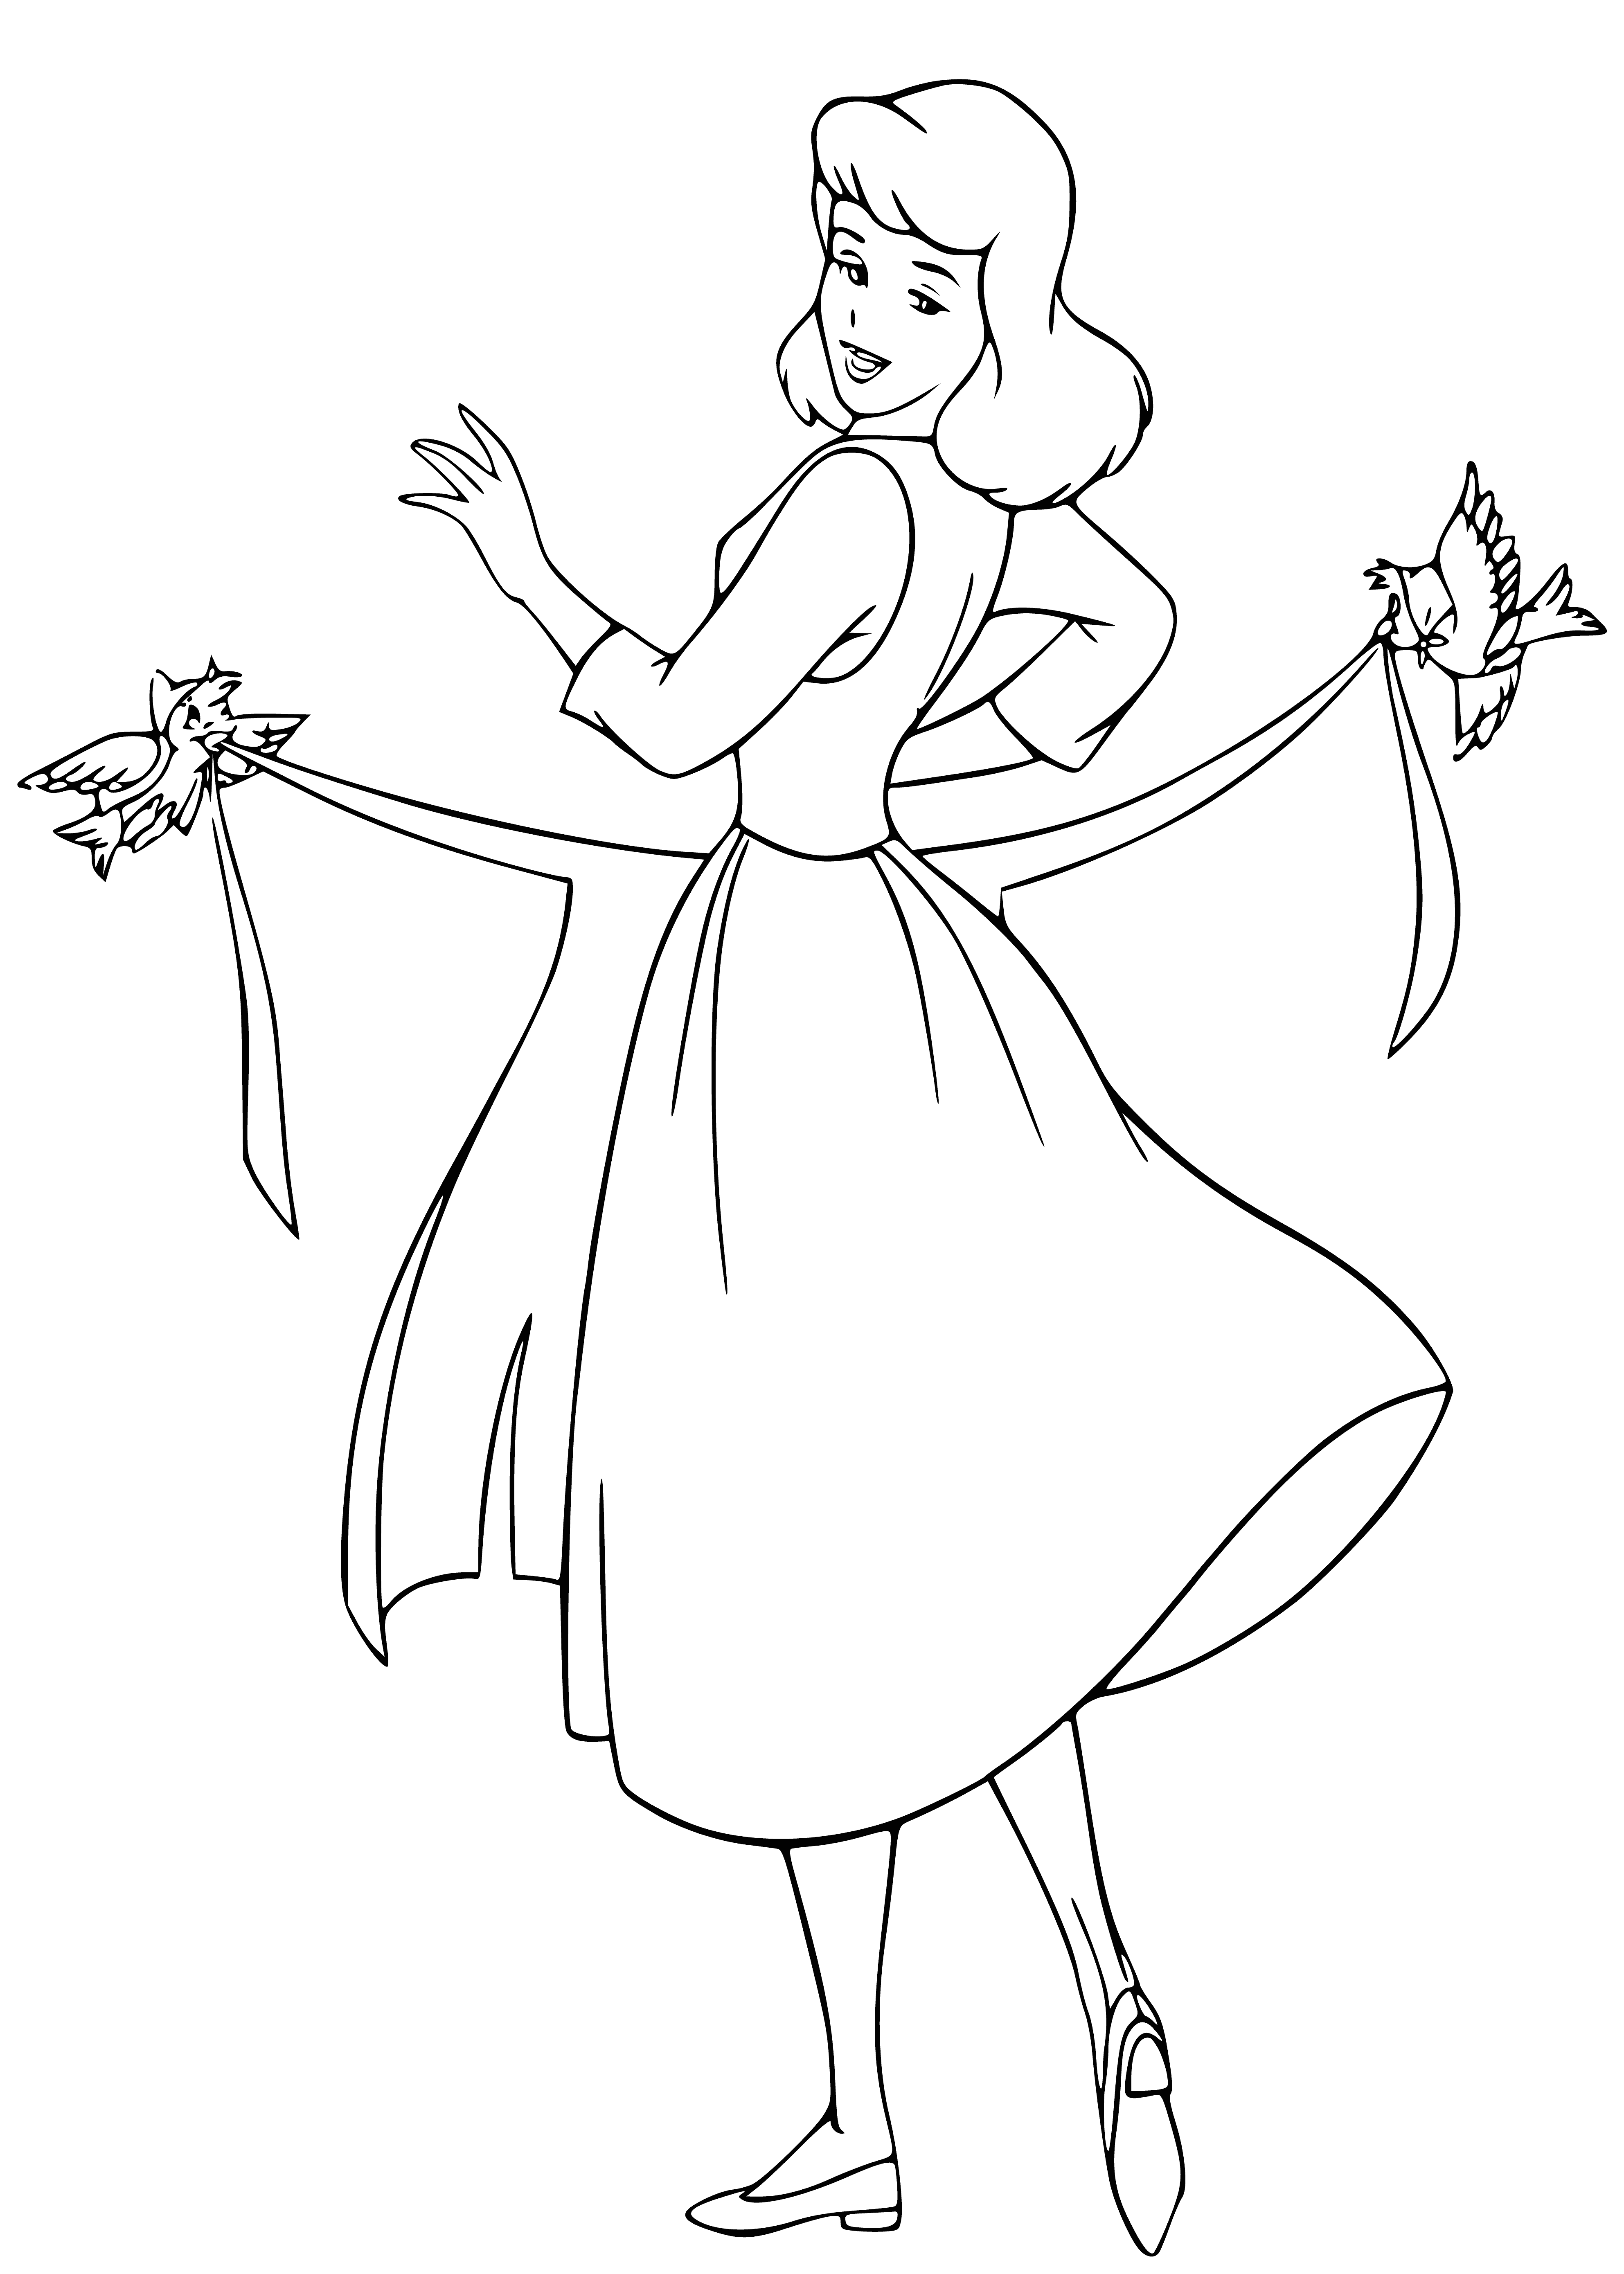 coloring page: Cinderella puts on an apron and looks out a window, her golden hair glinting in the light.